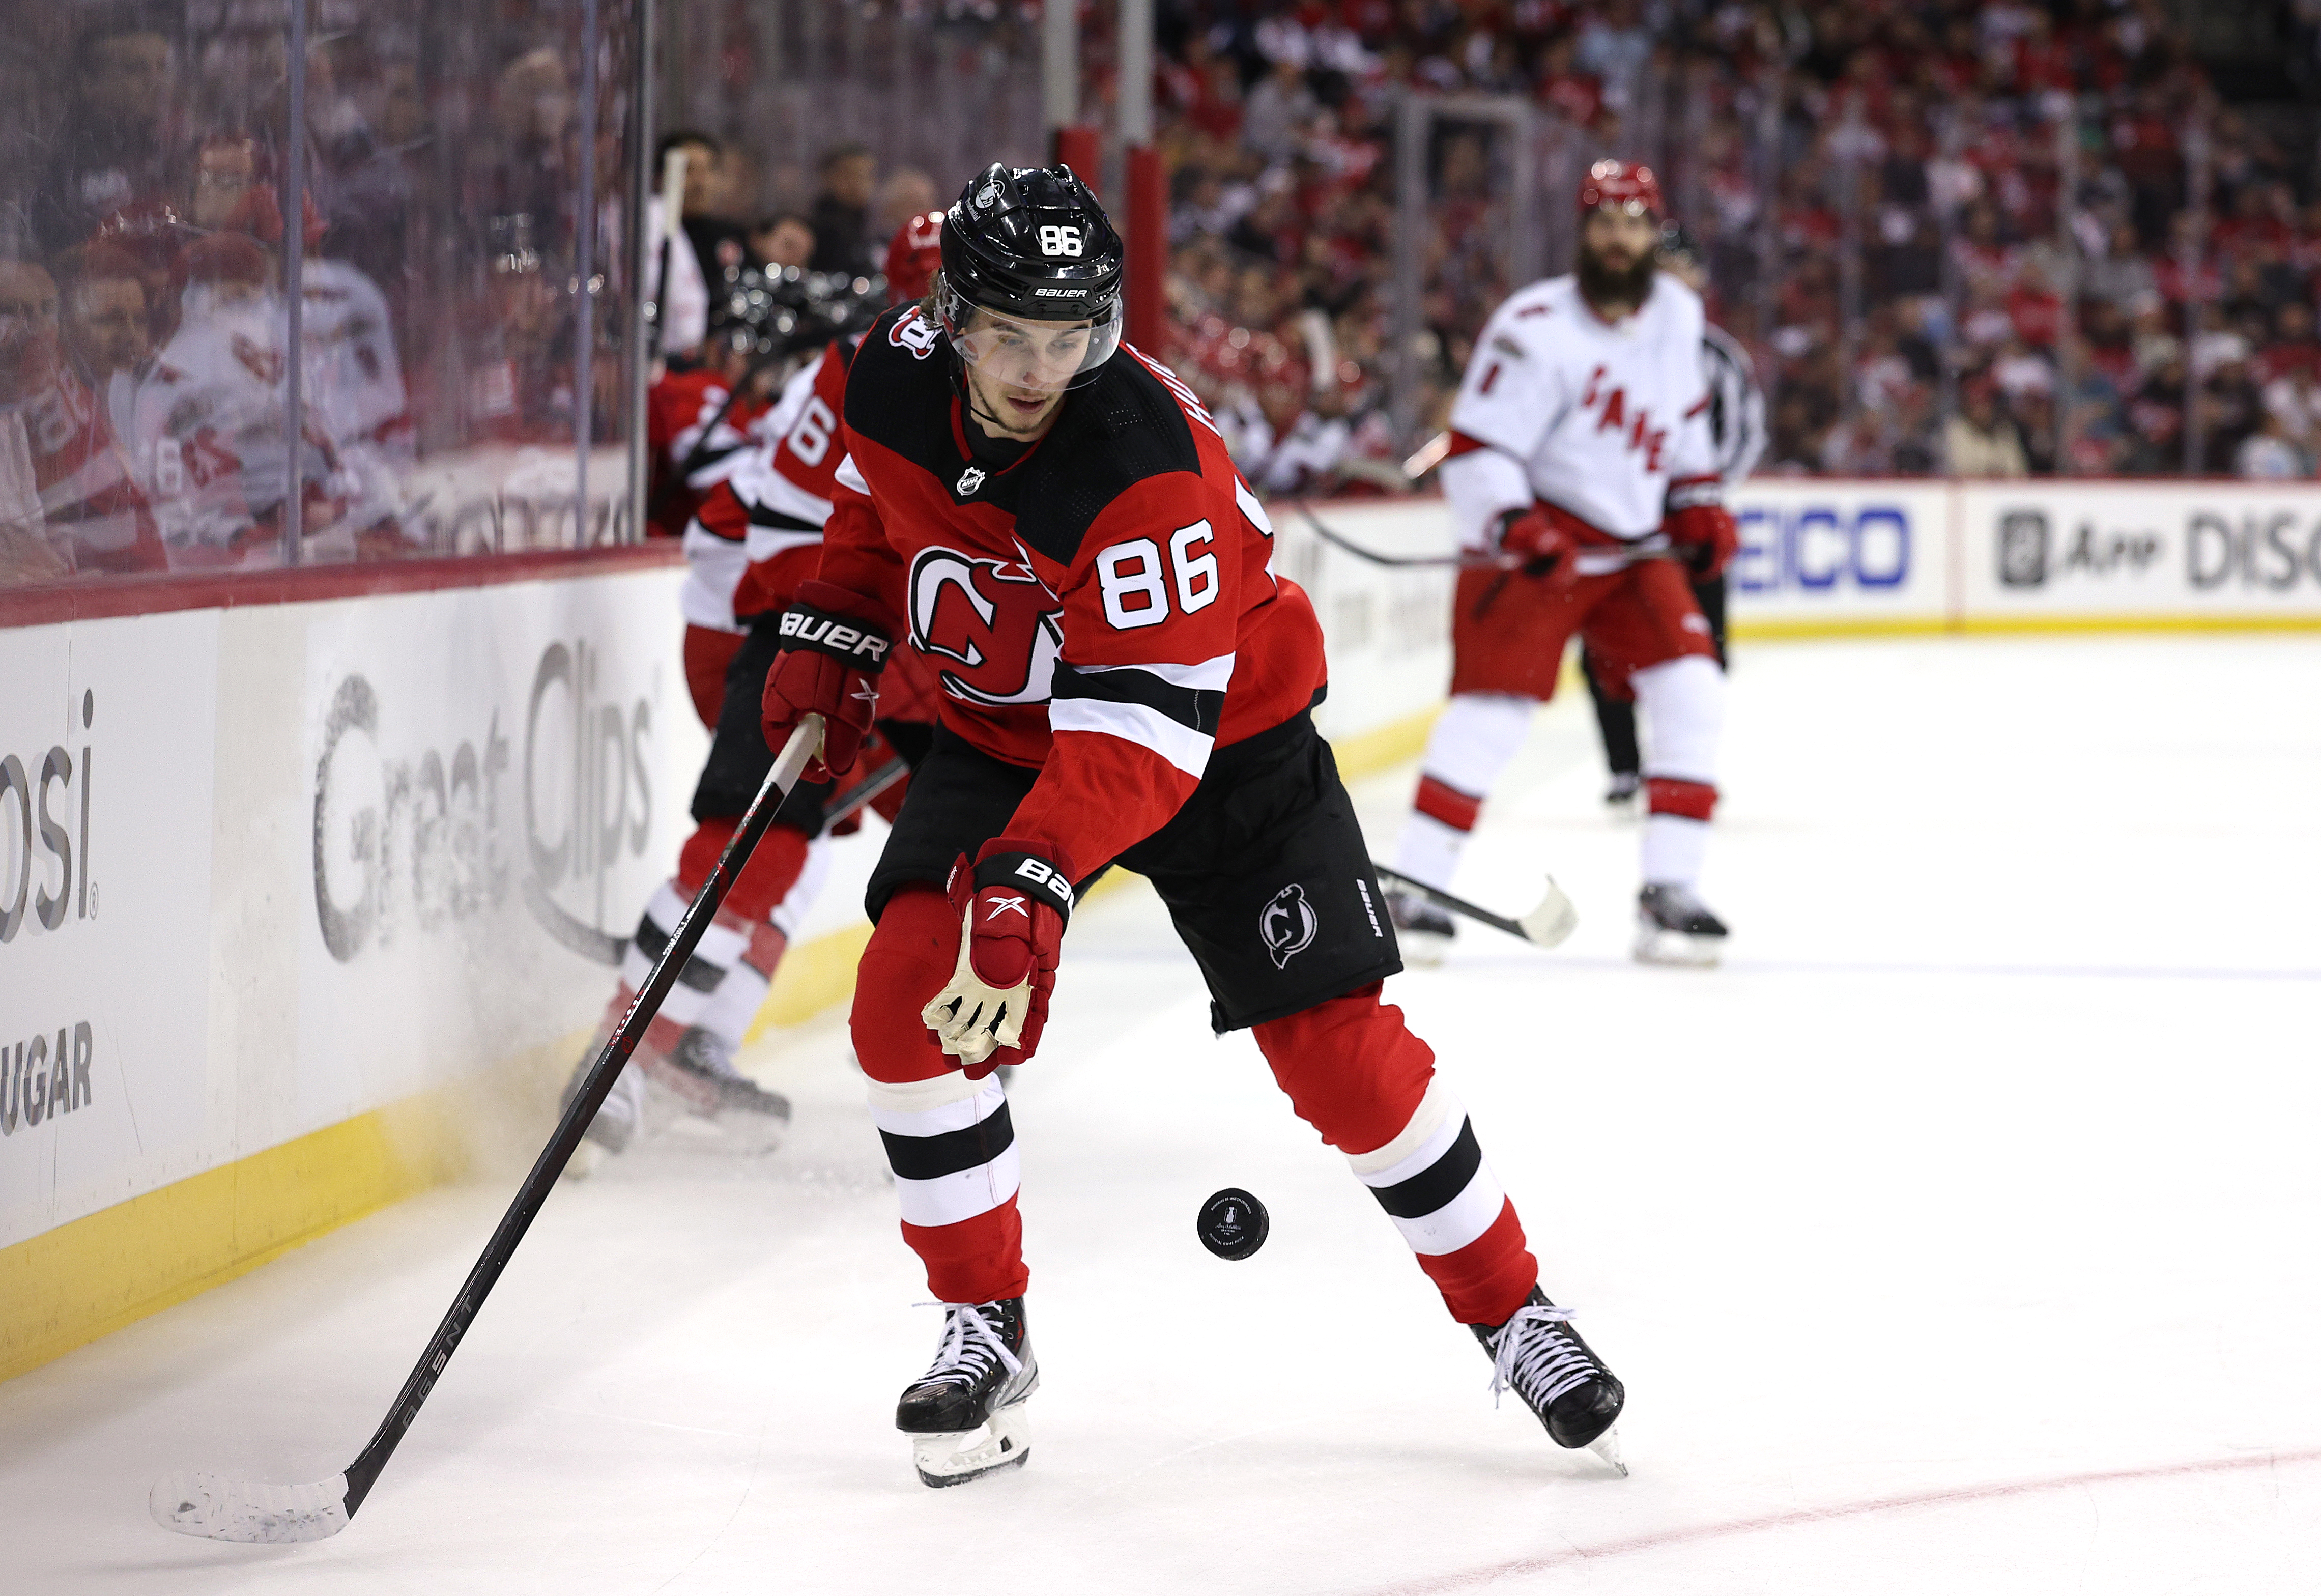 Rangers vs. Devils prediction, odds: NY aims for a 2nd straight